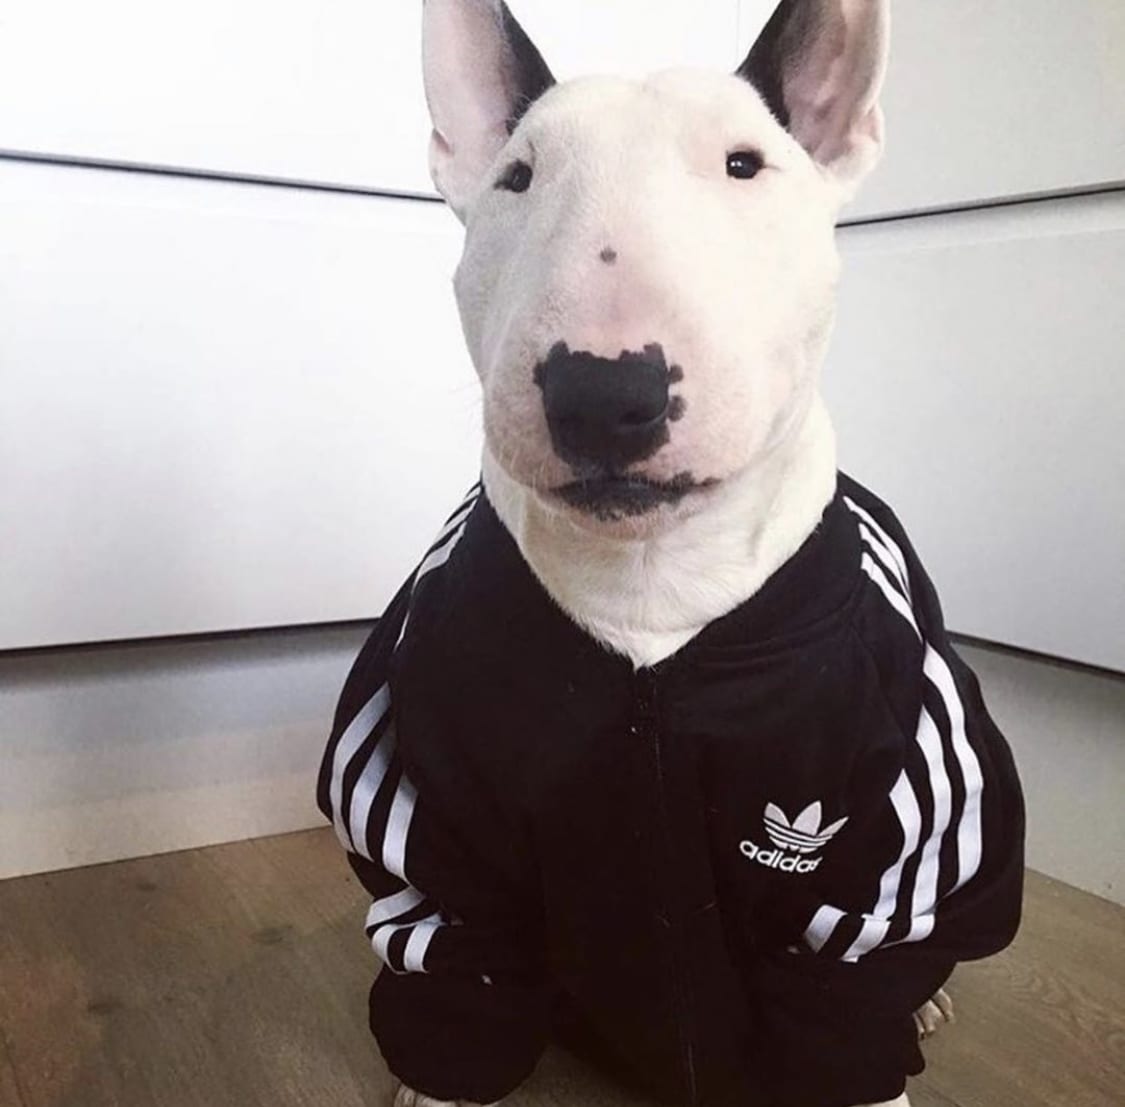 Bull Terrier wearing an adidas sweater while sitting on the floor